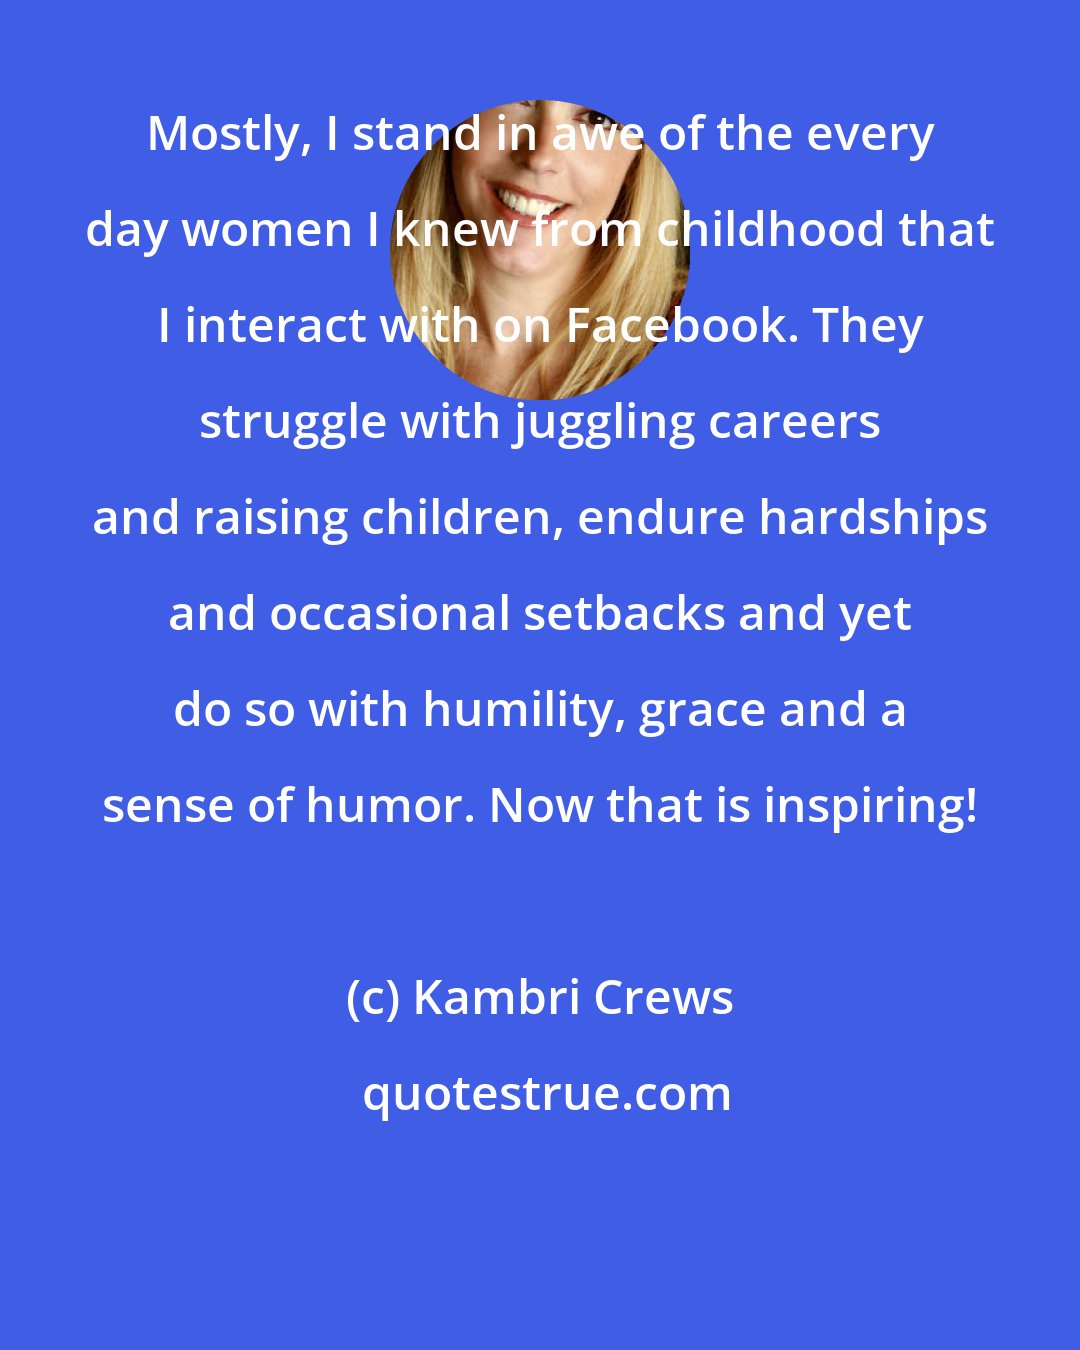 Kambri Crews: Mostly, I stand in awe of the every day women I knew from childhood that I interact with on Facebook. They struggle with juggling careers and raising children, endure hardships and occasional setbacks and yet do so with humility, grace and a sense of humor. Now that is inspiring!